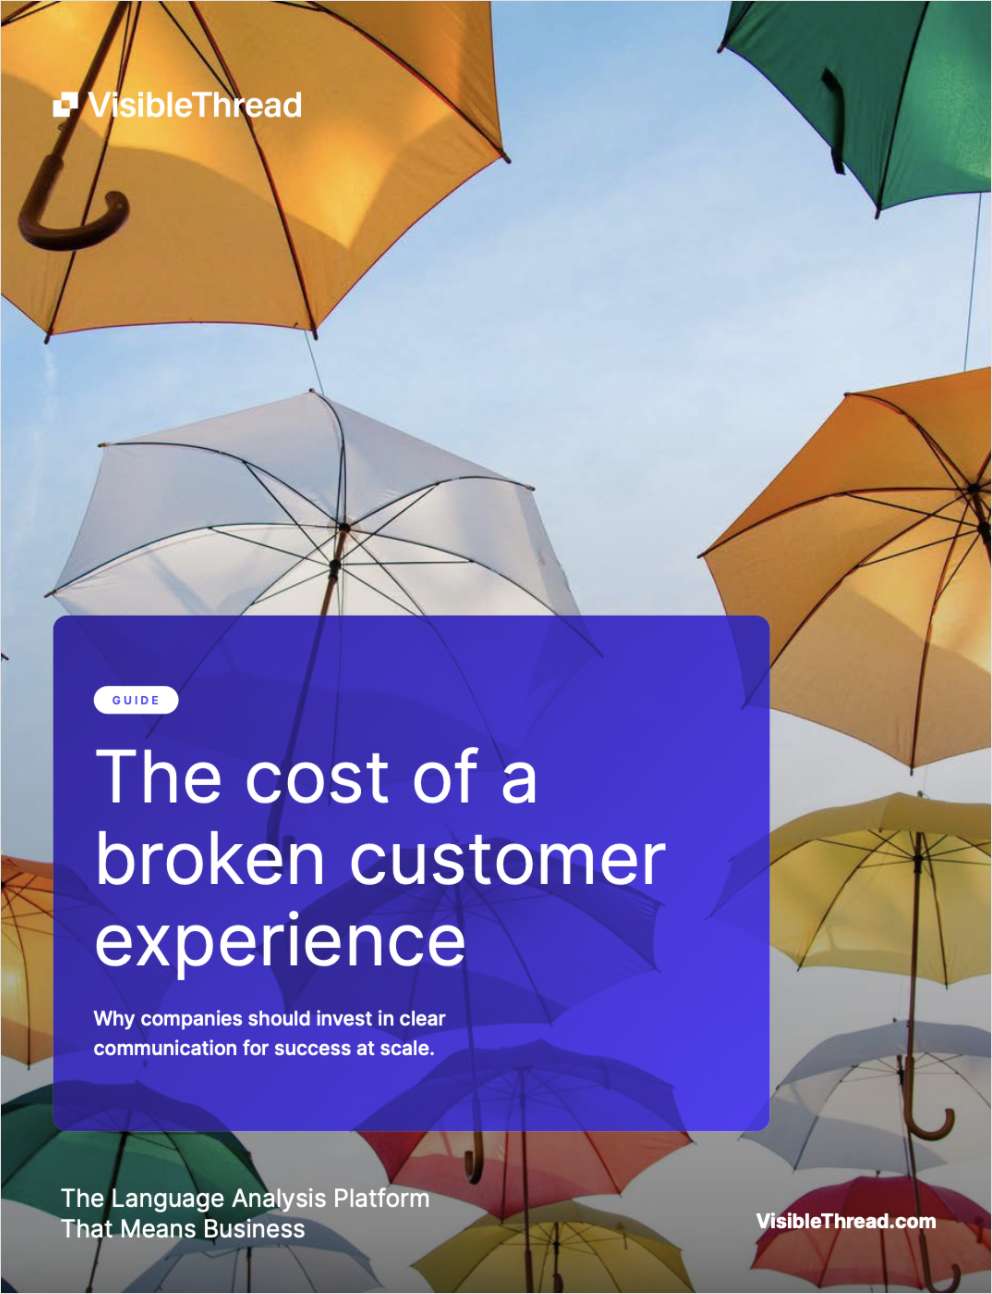 The cost of a broken customer experience